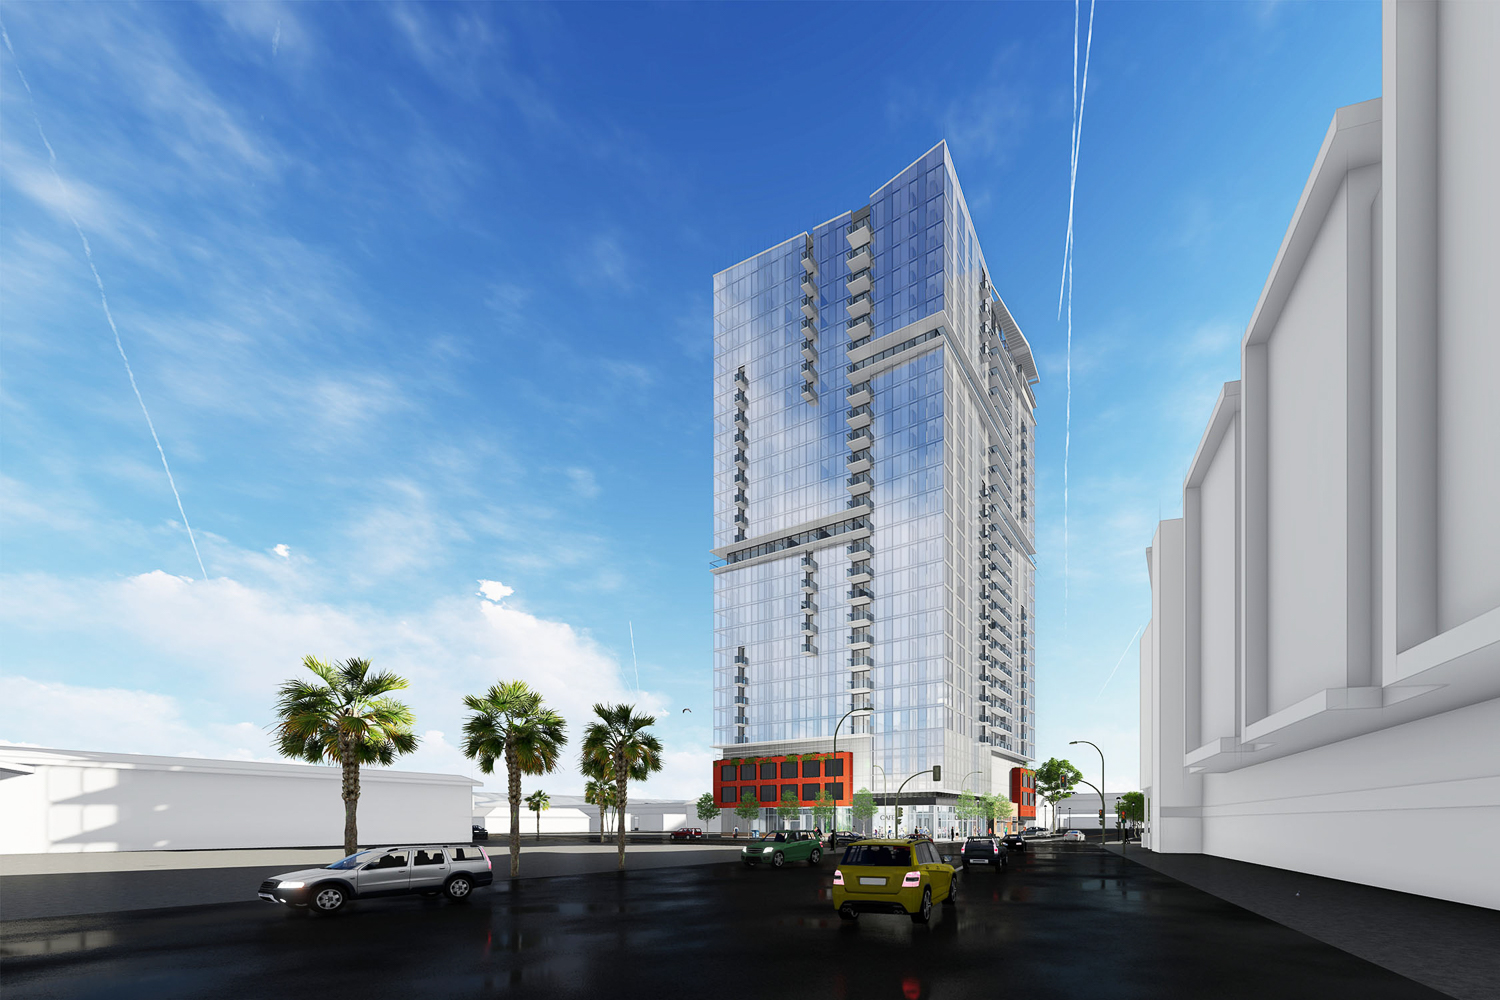 600 South 1st Street Garden Gate tower street view, rendering by C2K Architecture